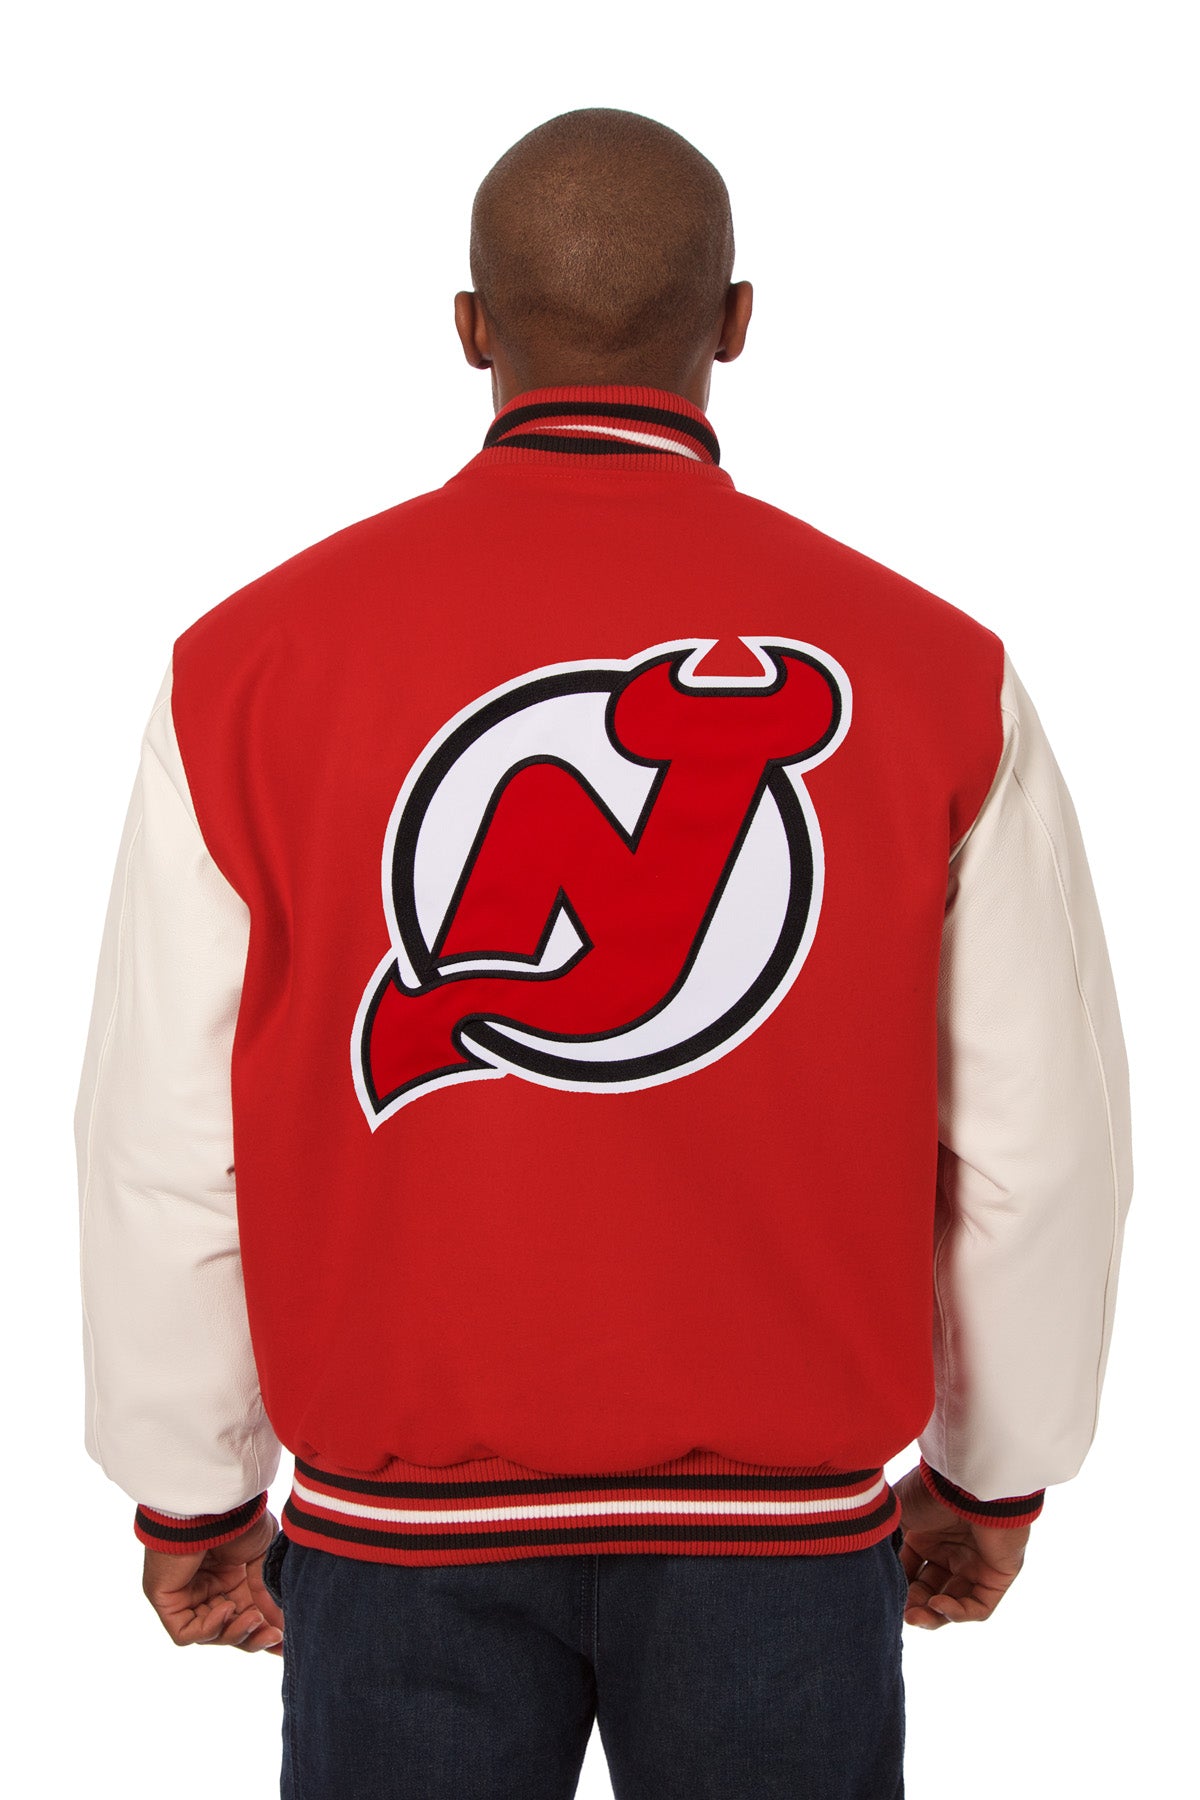 New Jersey Devils Embroidered Wool and Leather Jacket